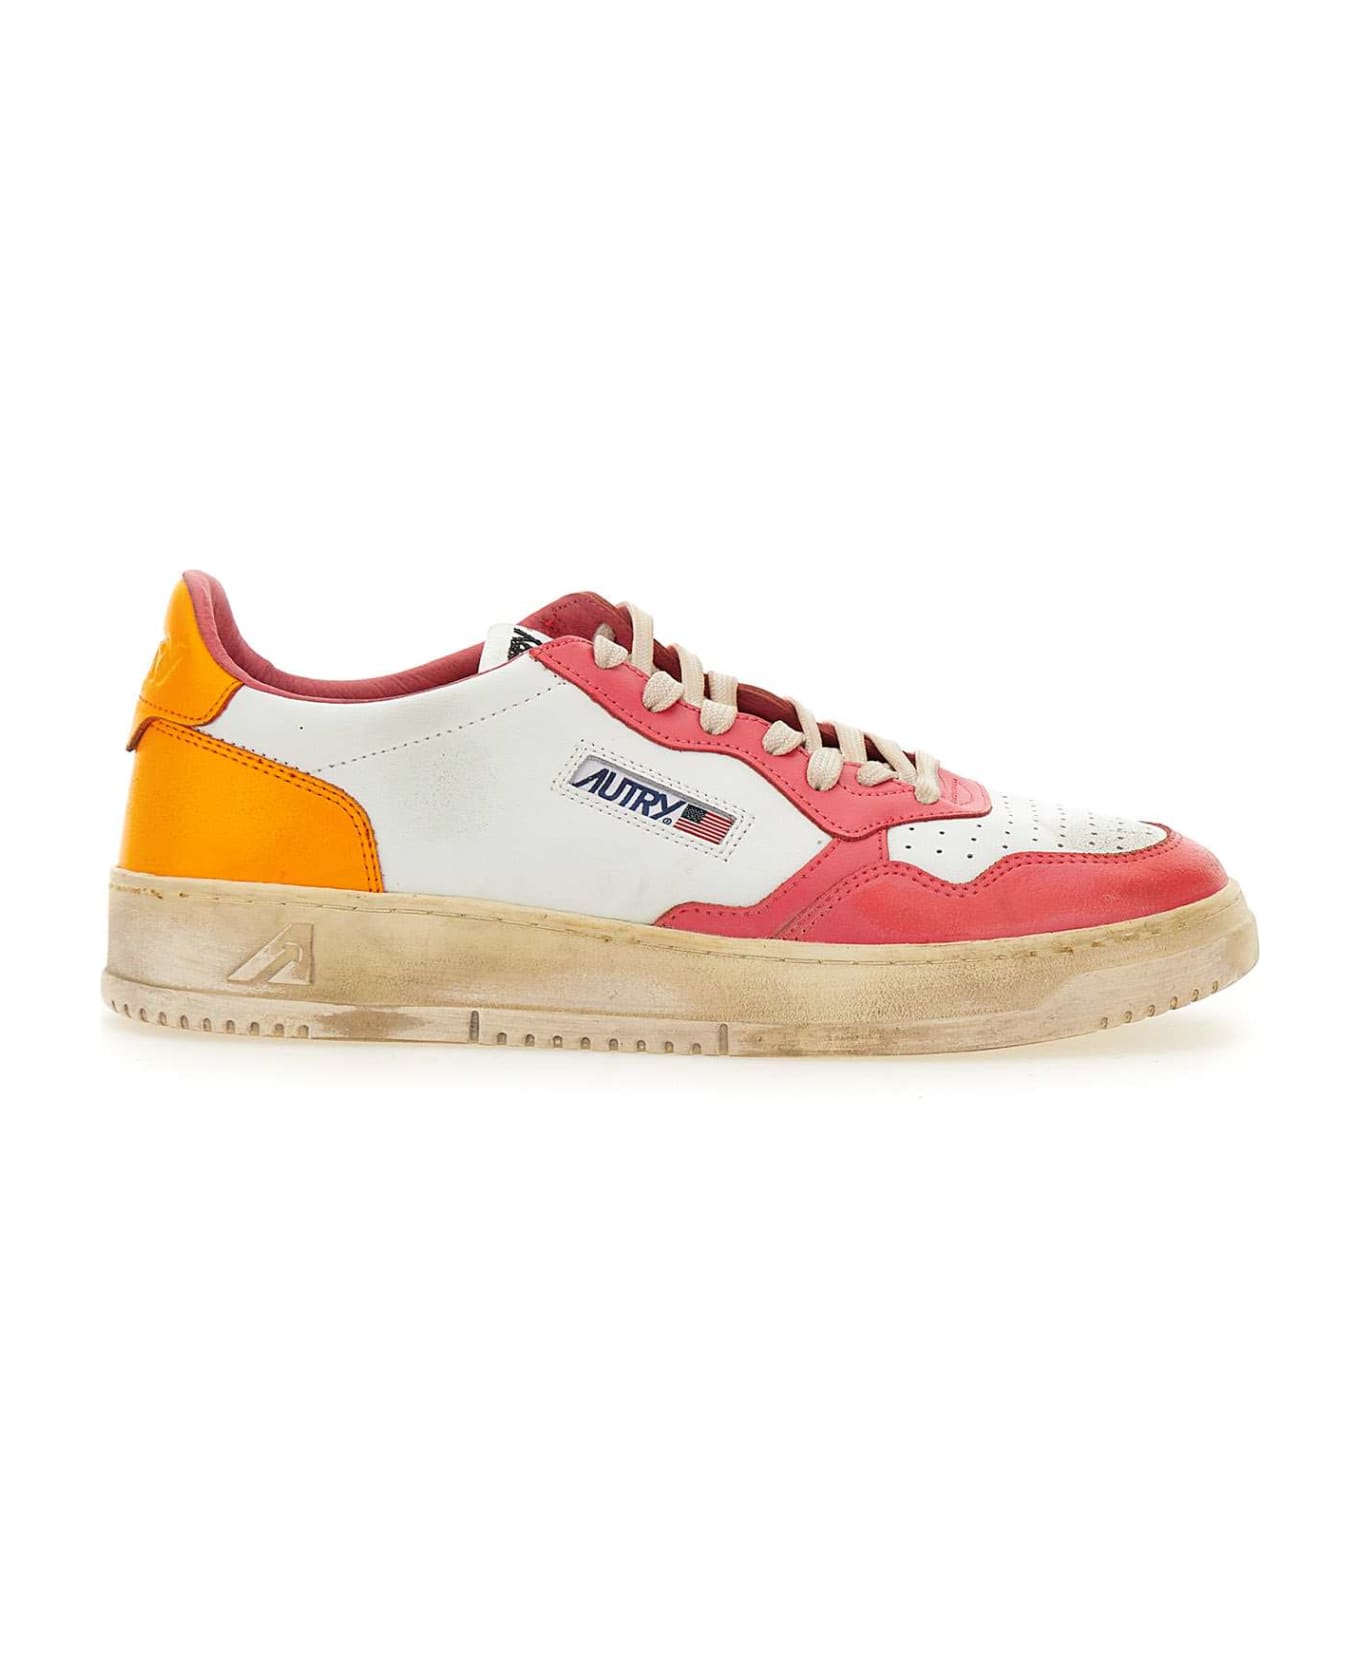 Autry 'avlm Sv31' Sneakers Leather - MULTICOLOR